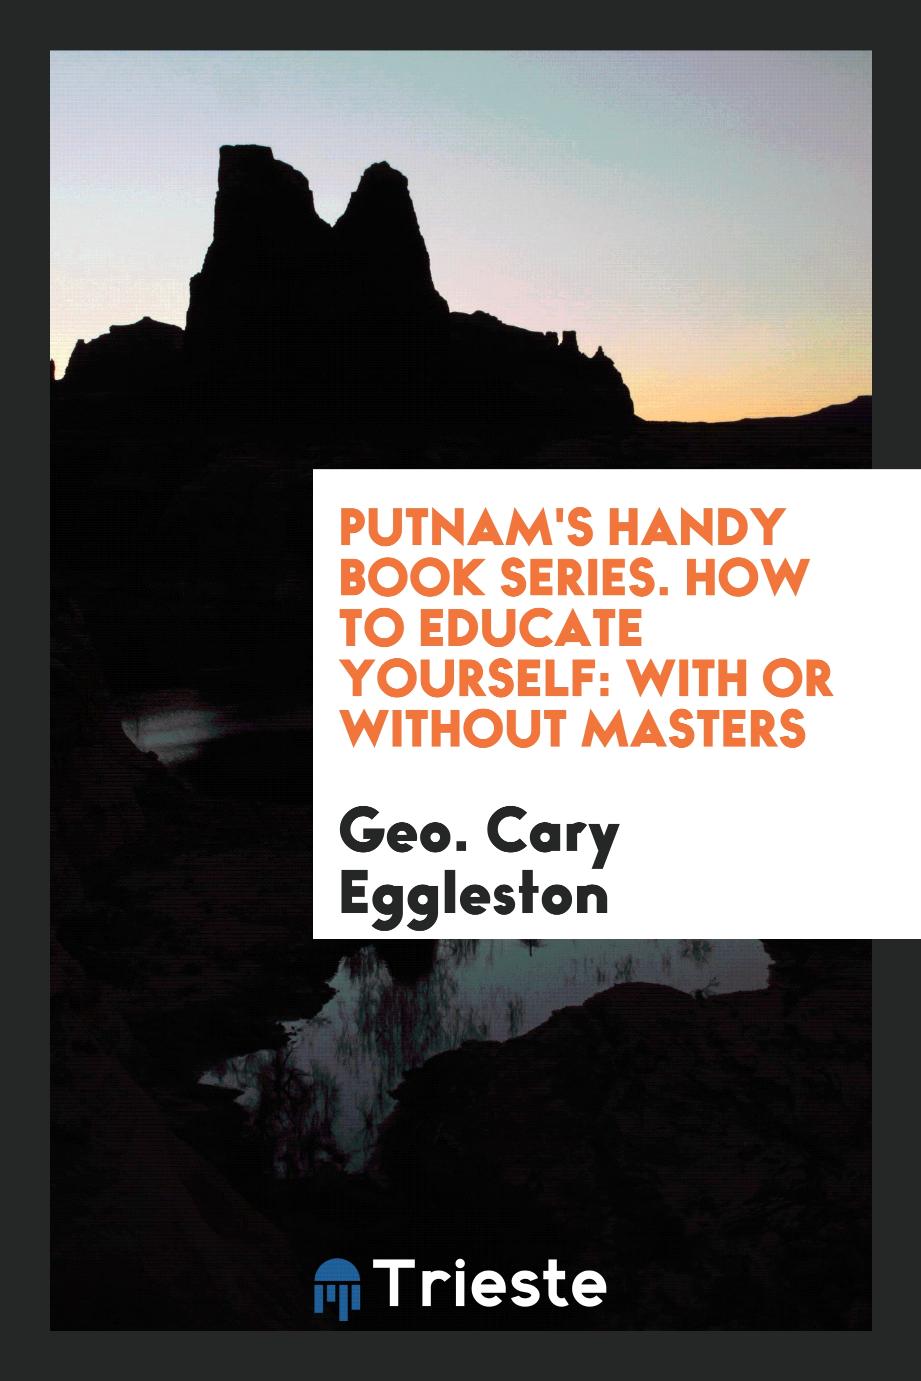 Putnam's Handy Book Series. How to Educate Yourself: With or Without Masters